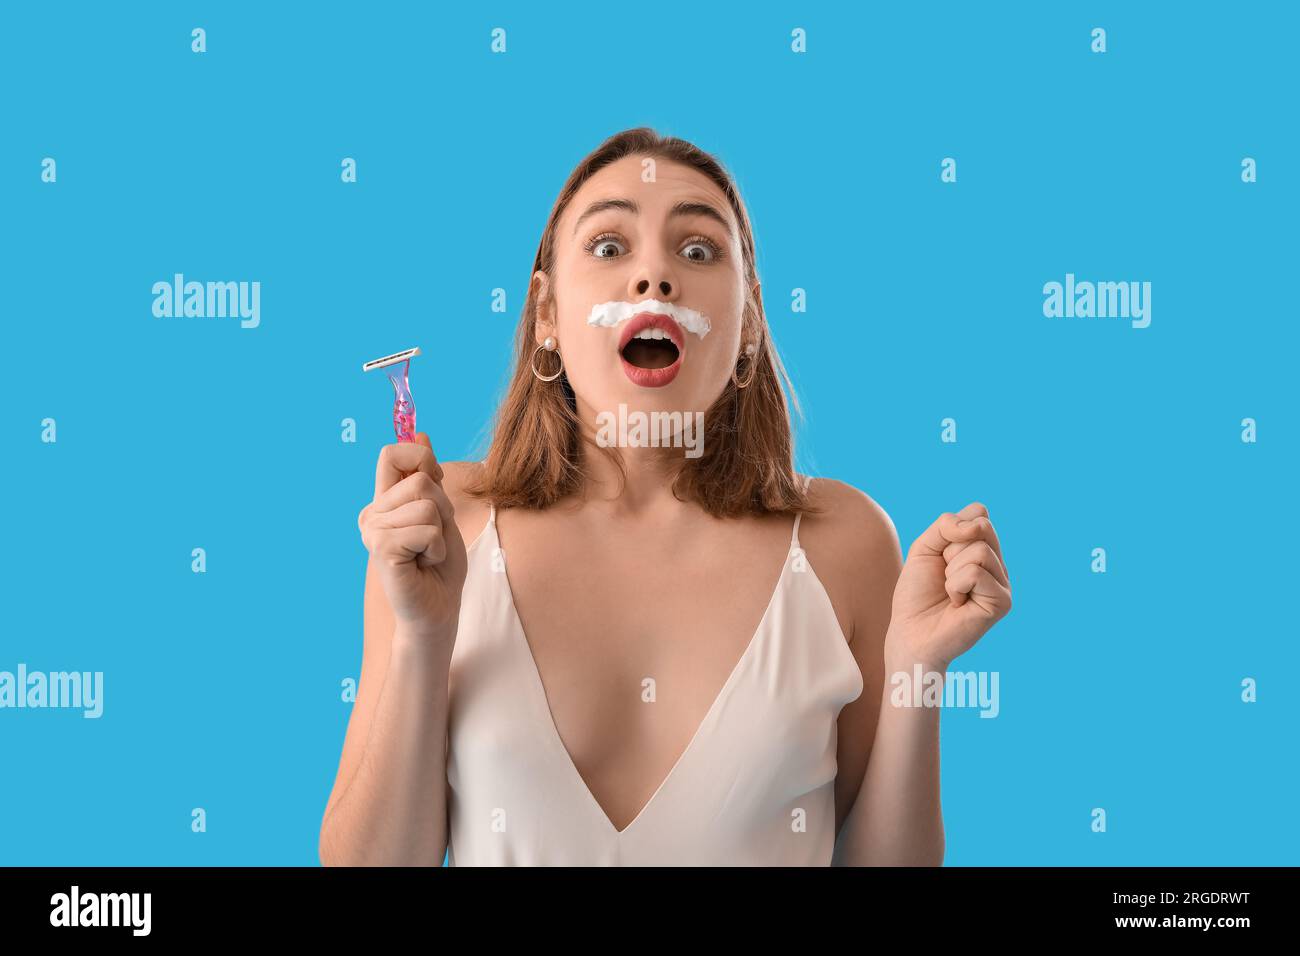 Shocked young woman with shaving foam and razor on blue background, closeup Stock Photo